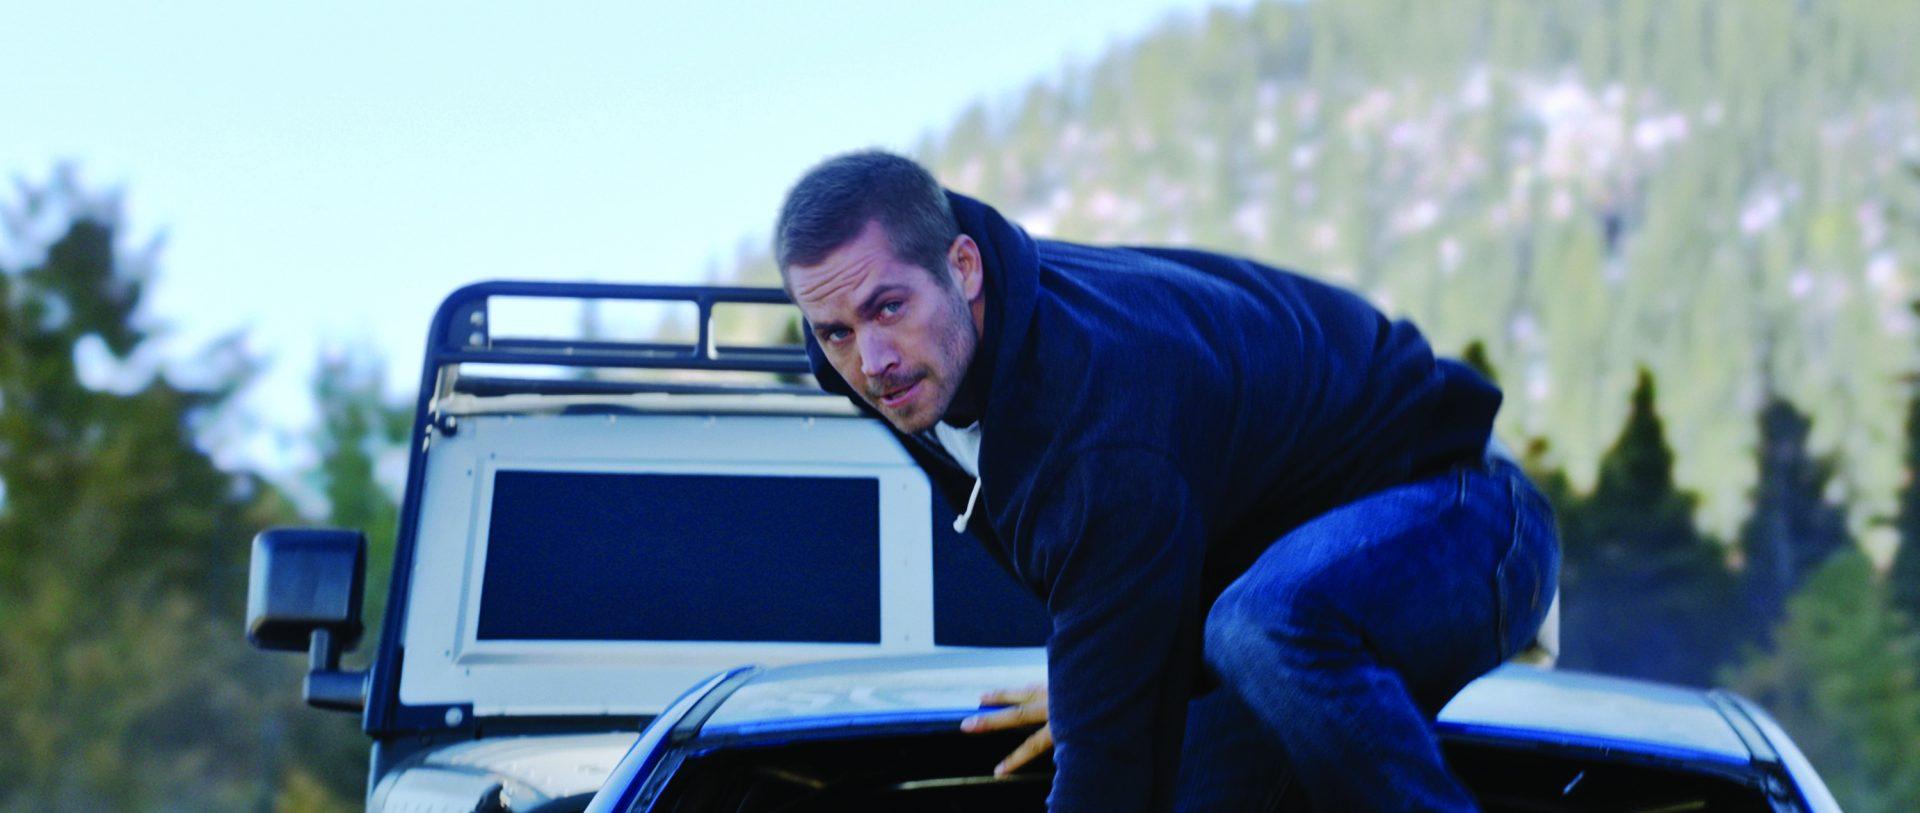 Brian (Paul Walker) makes his move in Furious 7.
Photo courtesy of Universal Pictures/TNS